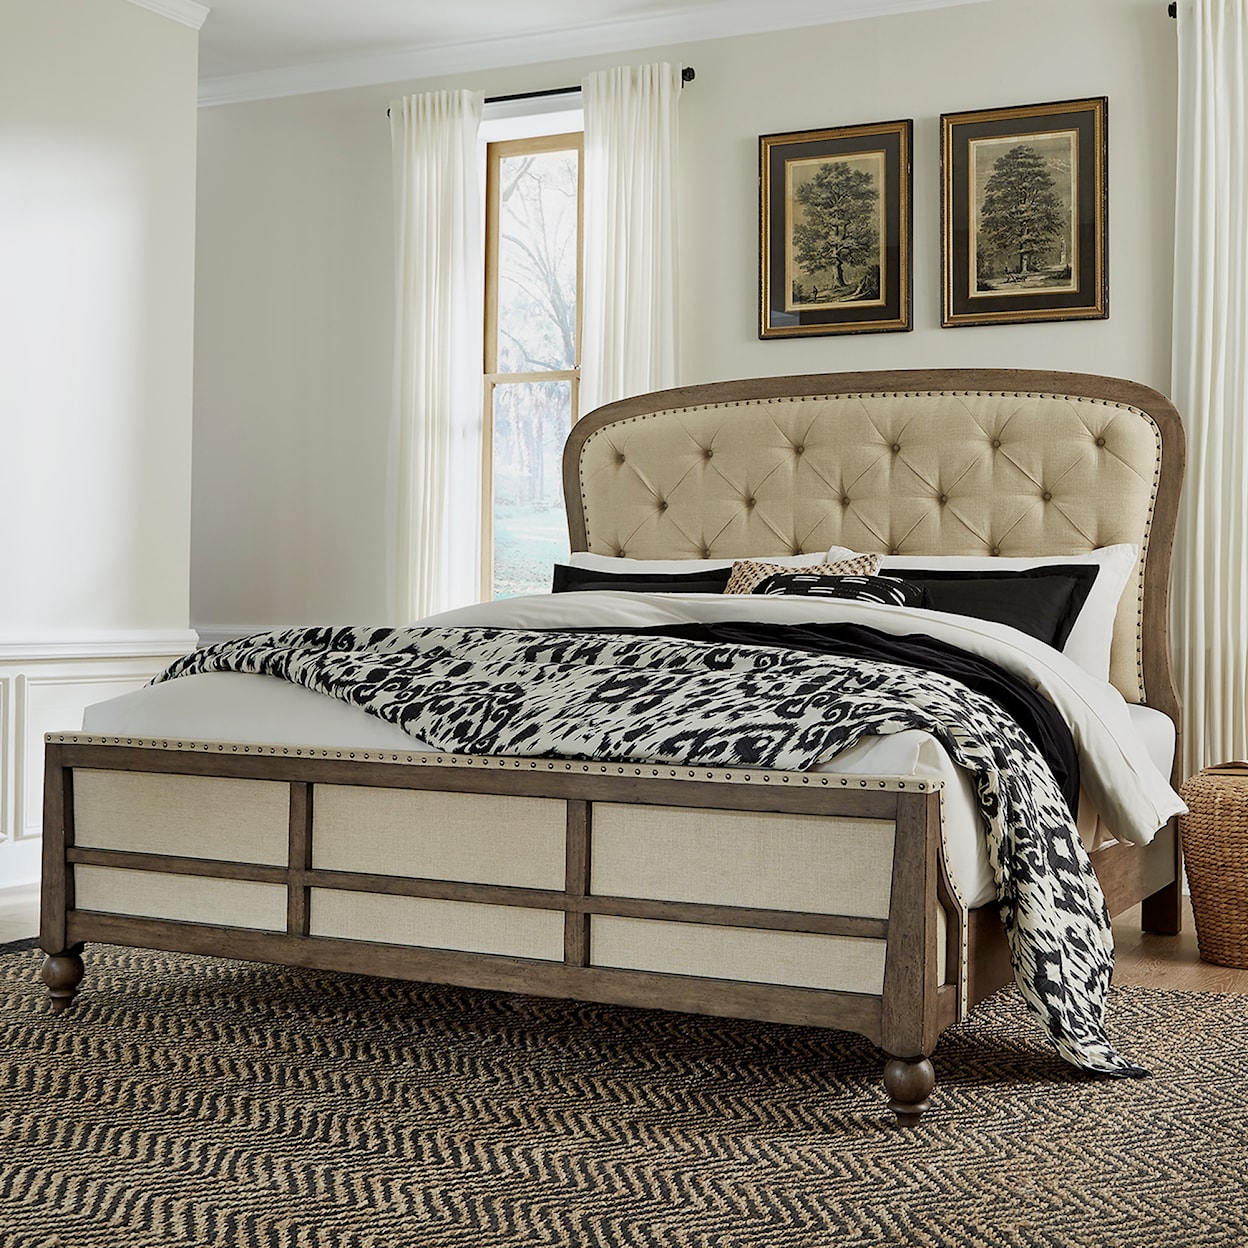 Libby Americana Farmhouse Upholstered Queen Shelter Bed